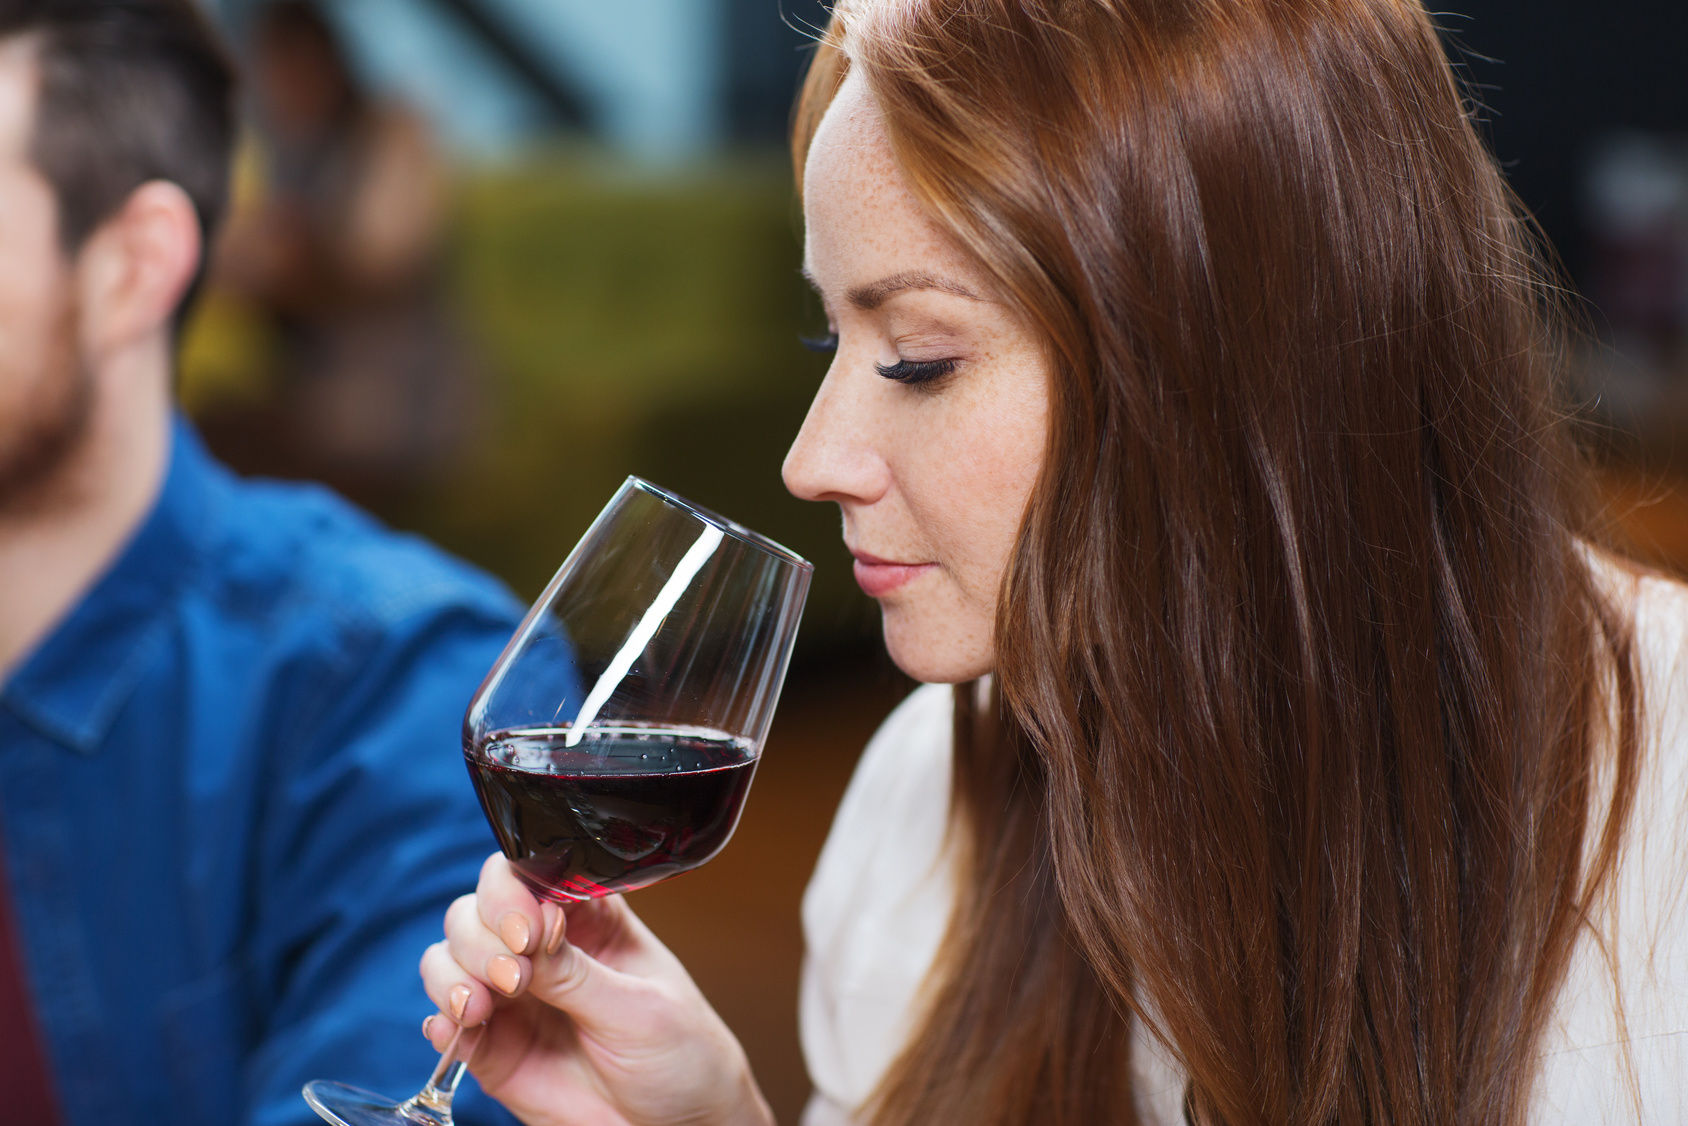 smiling woman drinking red wine at restaurant